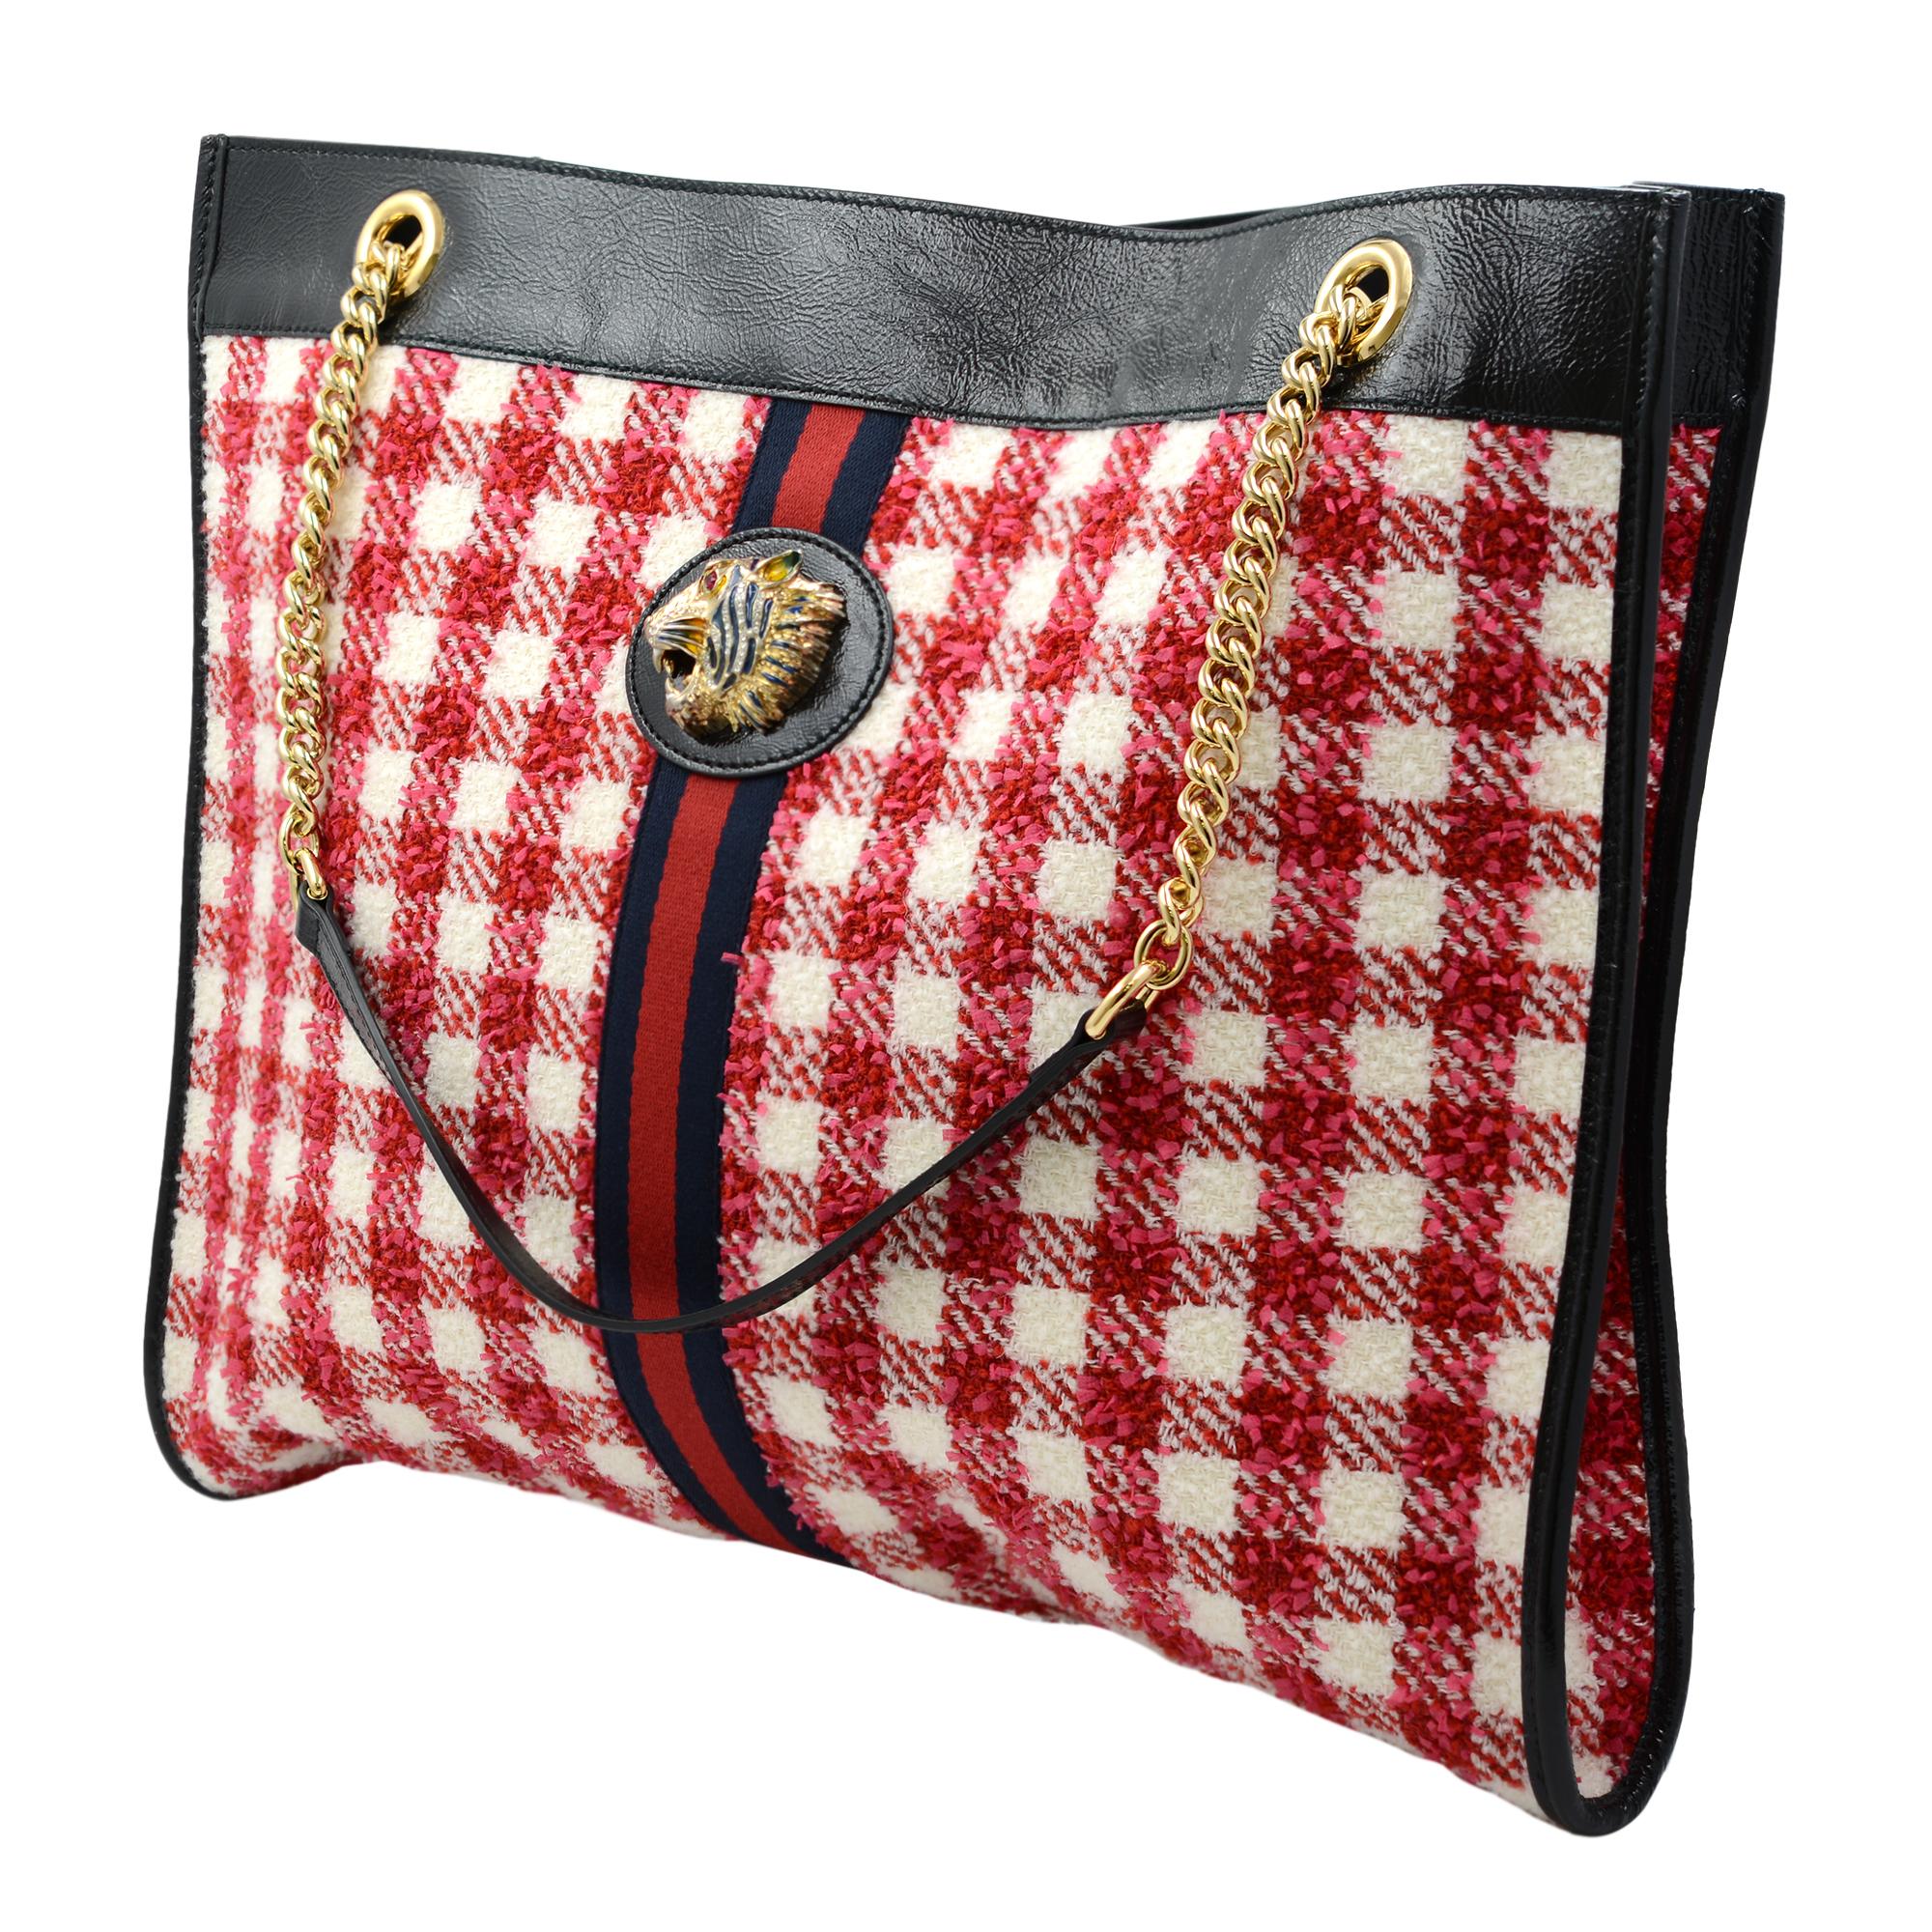 This stylish Gucci Rajah shoulder bag is finely crafted of woven red and white printed tweed with black leather trim. The bag features a prominent crystal-encrusted tiger head medallion on the front, red and blue web striping, and gold chain-link